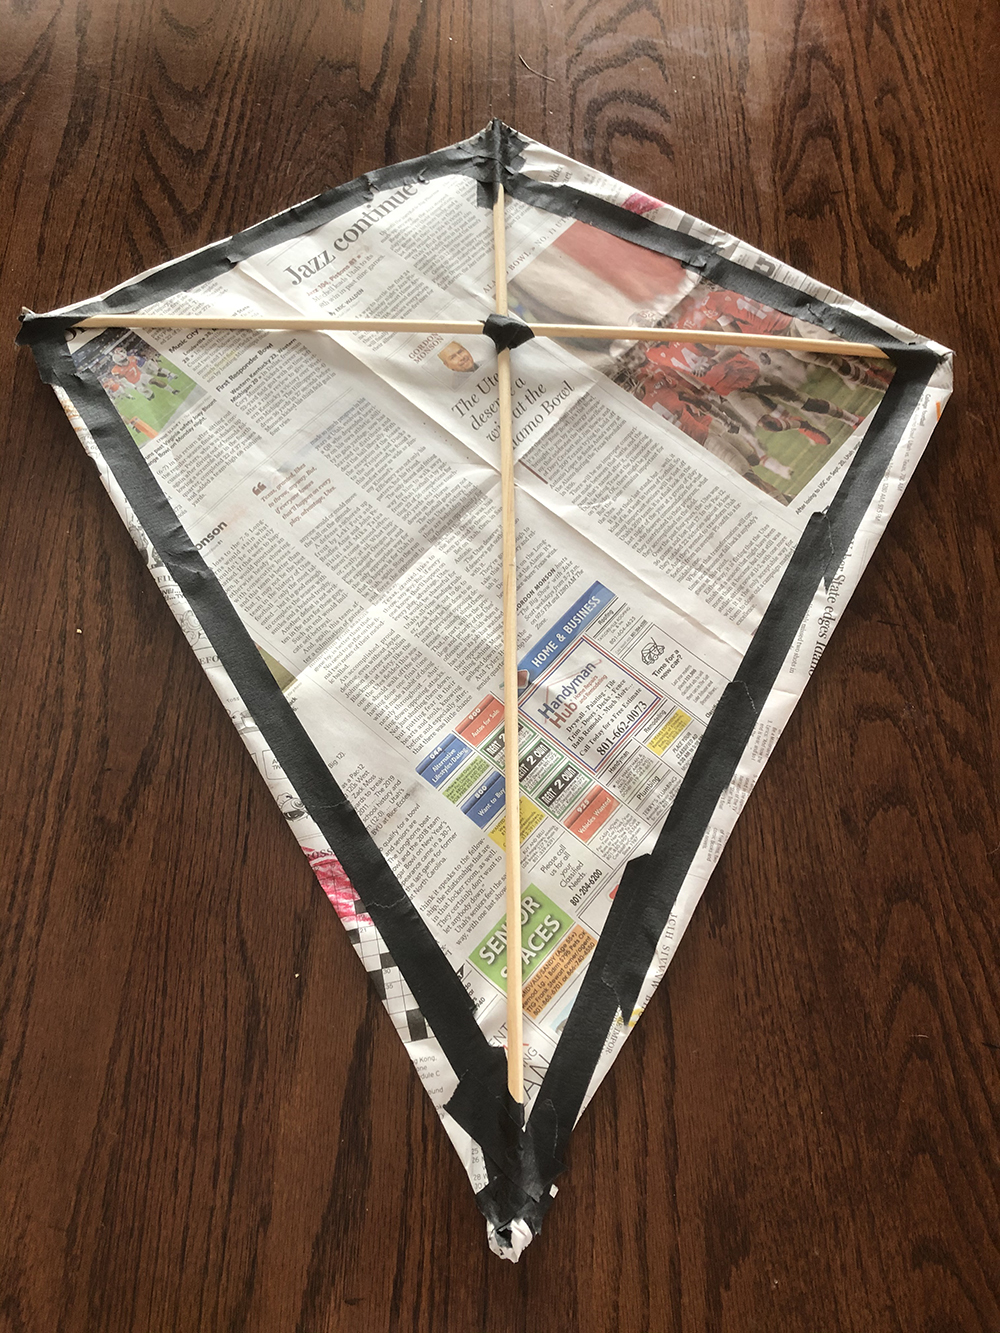 back side of the kite with black tape around the perimeter 